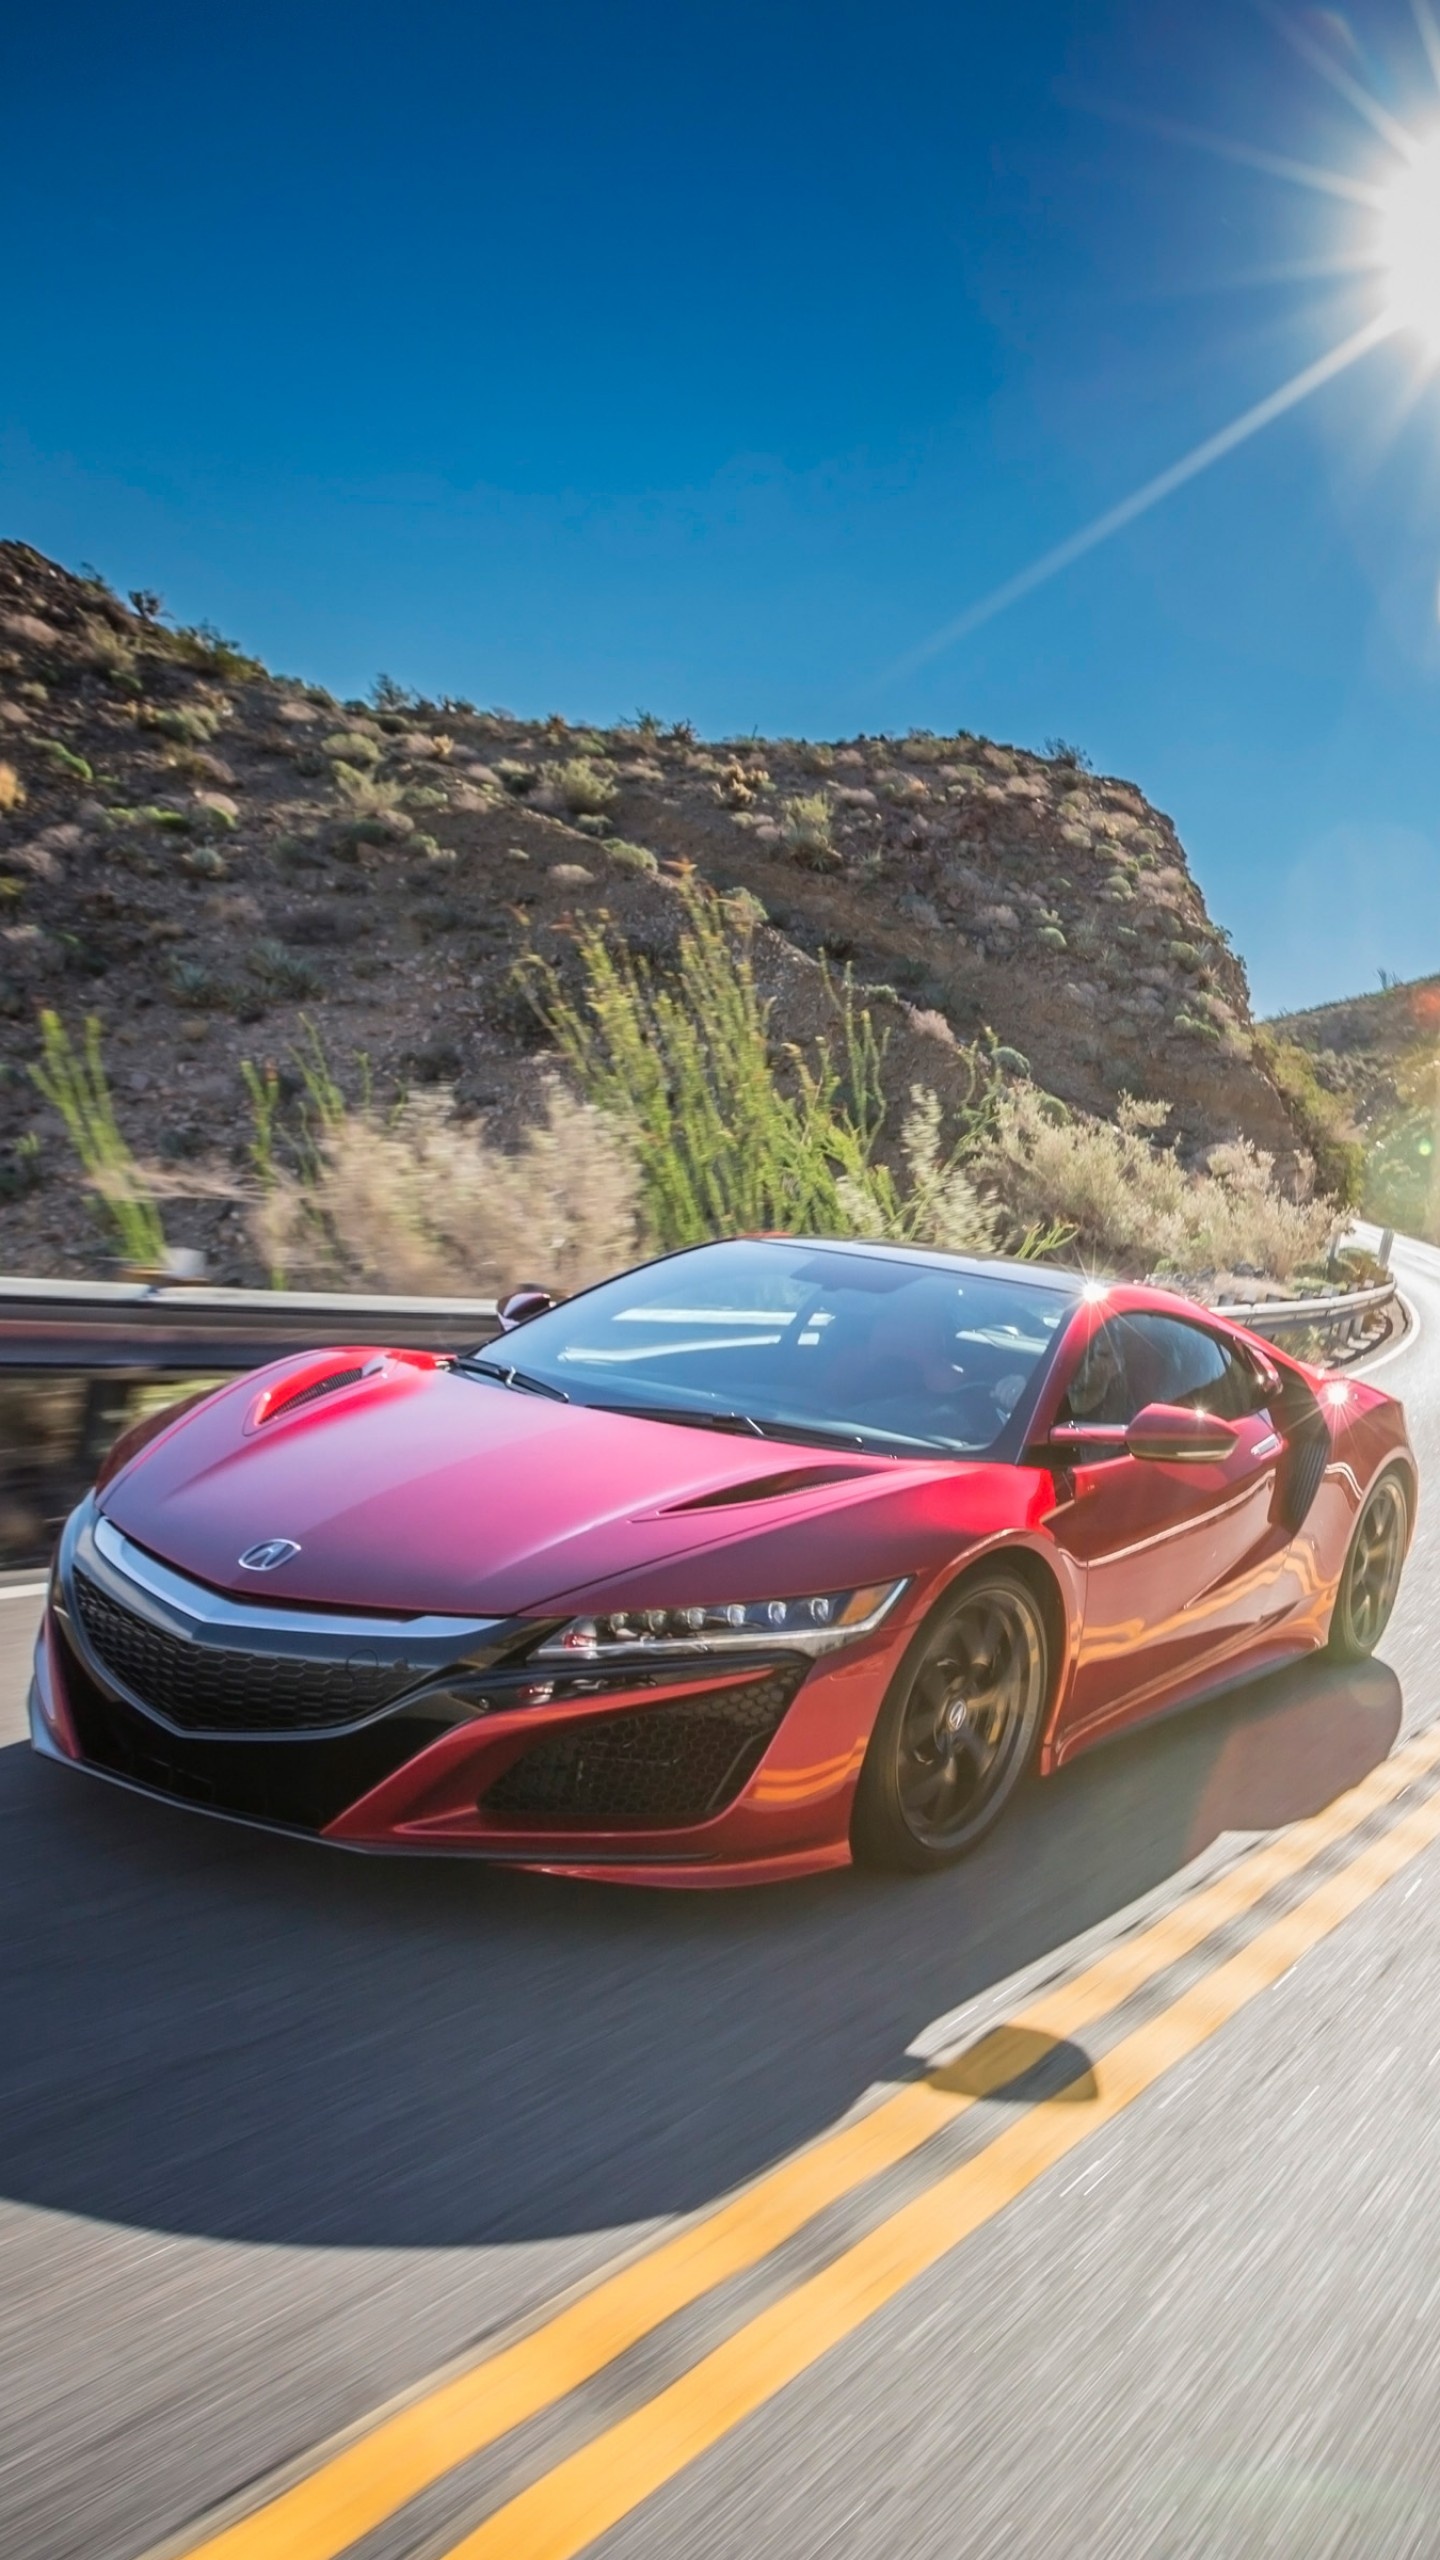 Sports Car: Acura NSX, Features retractable hardtop or removable roof. 1440x2560 HD Background.